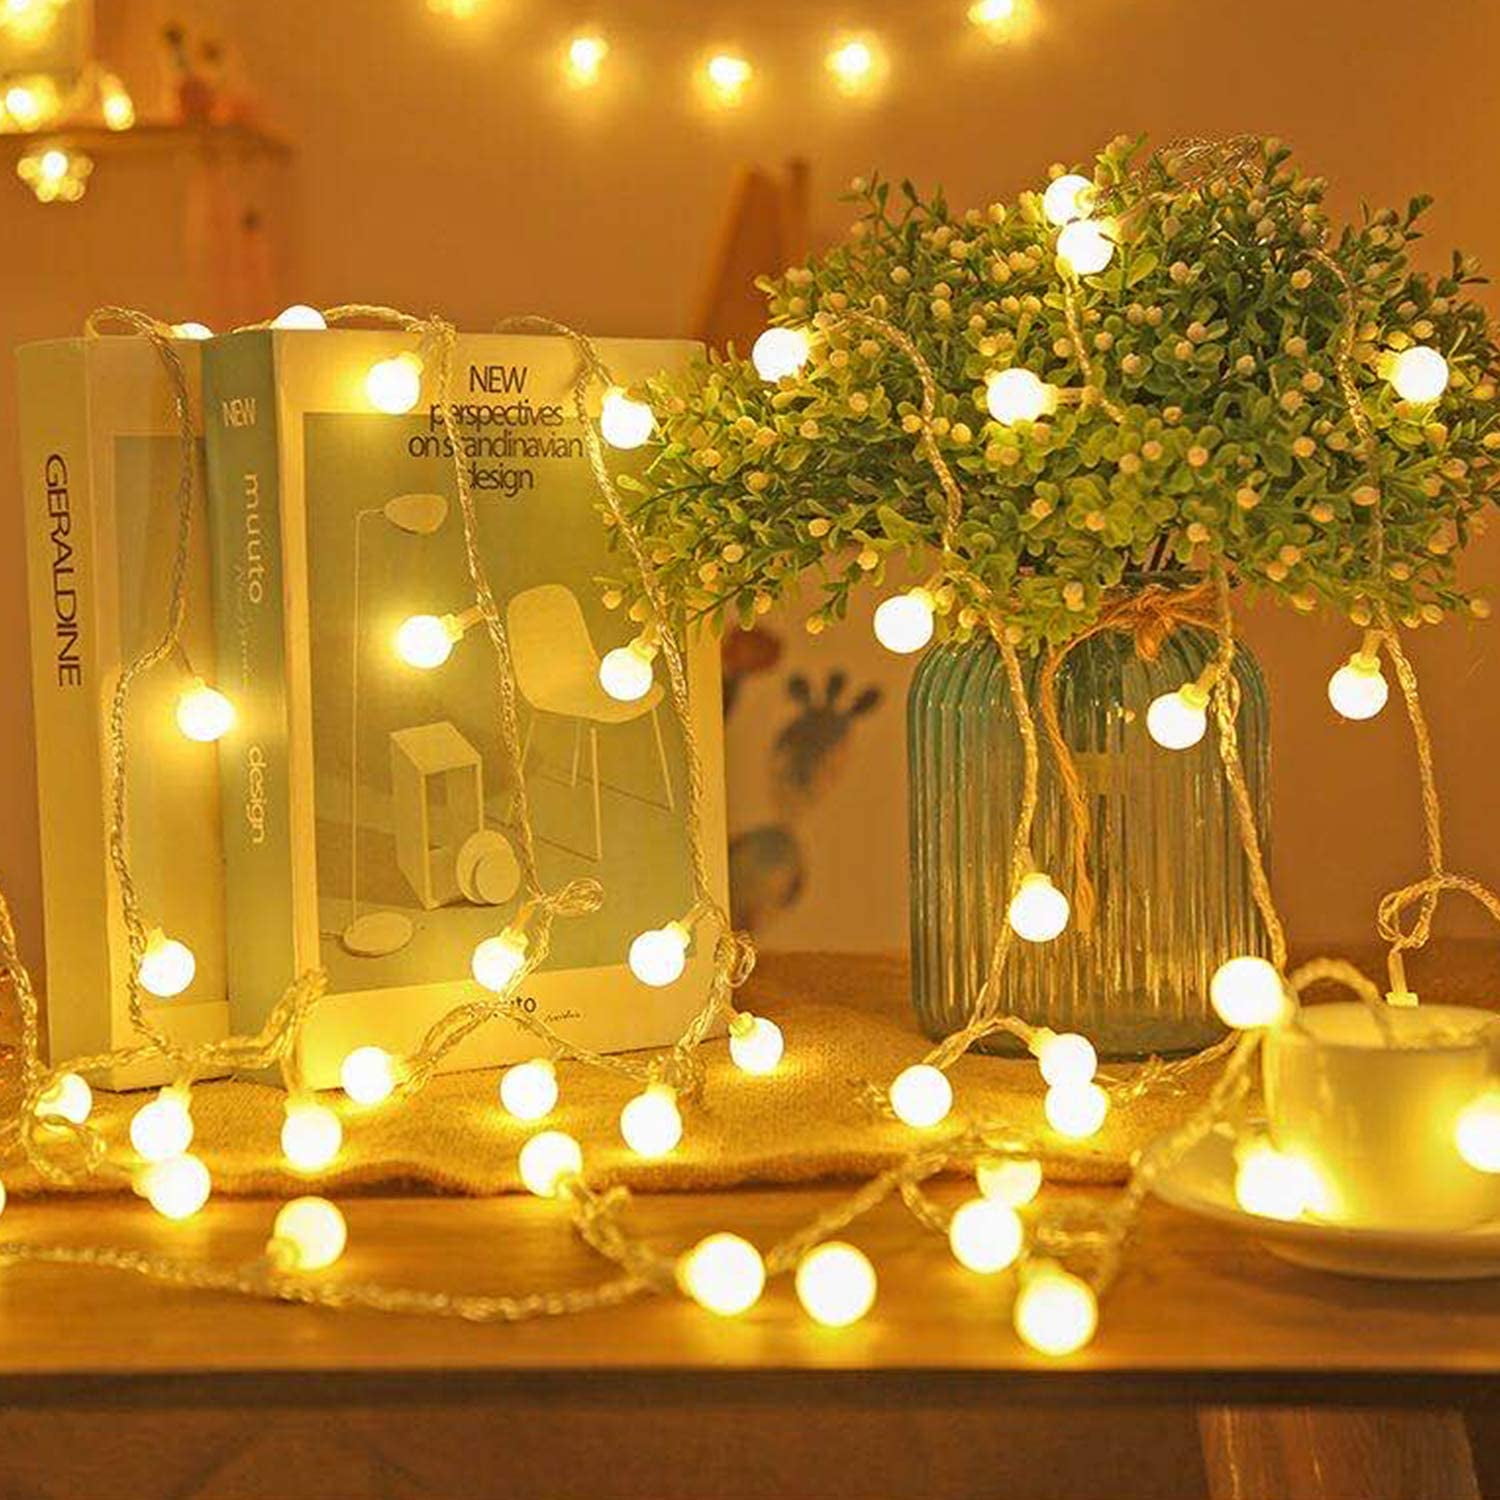 Details about   Christmas Santa LED String Lights Home Xmas Tree Party Fairy Hanging Lamp Decor 